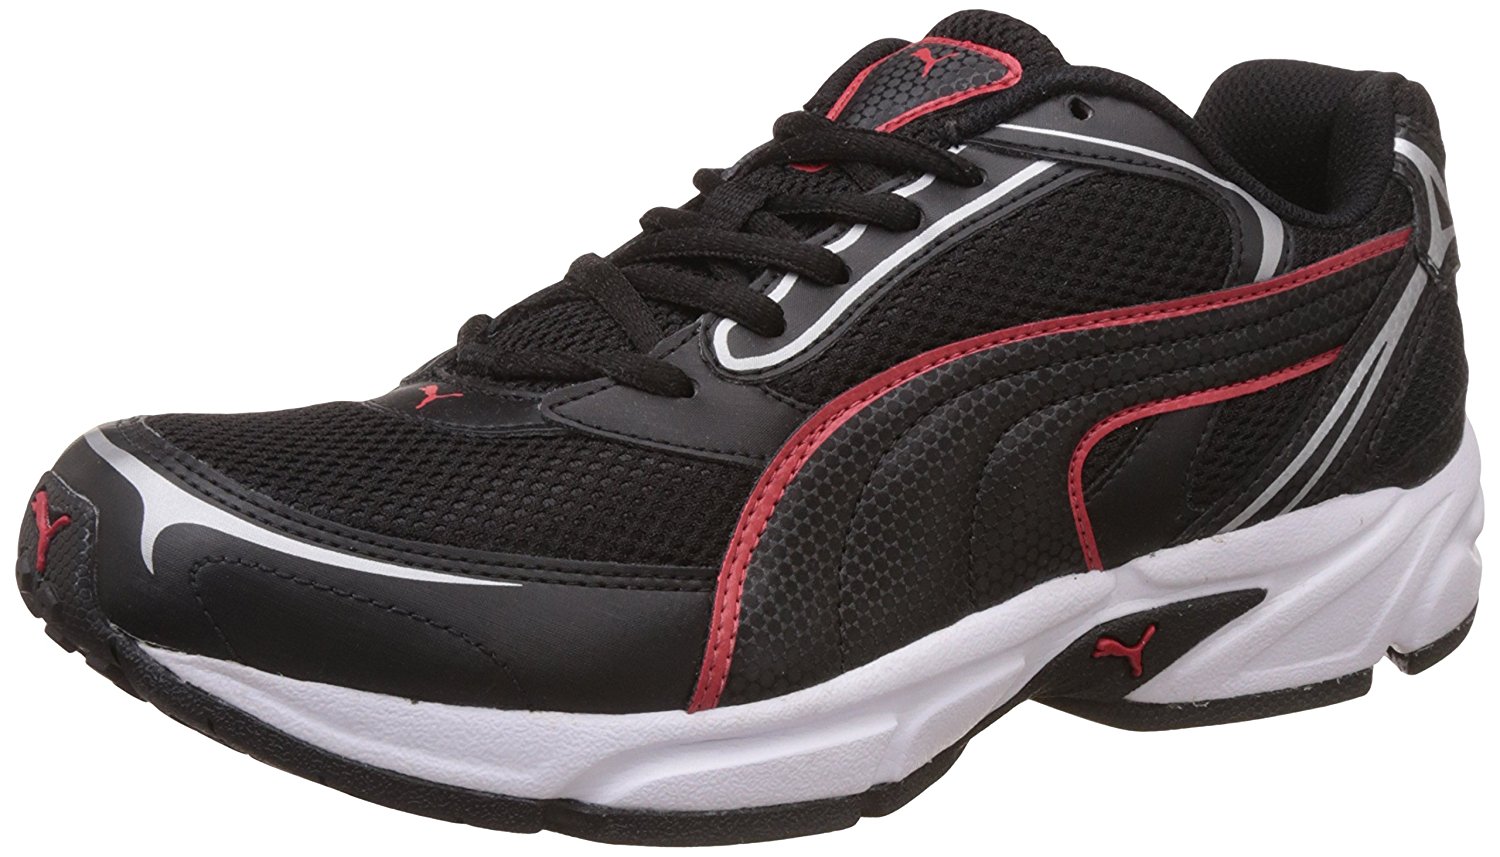 puma aron ind running shoes